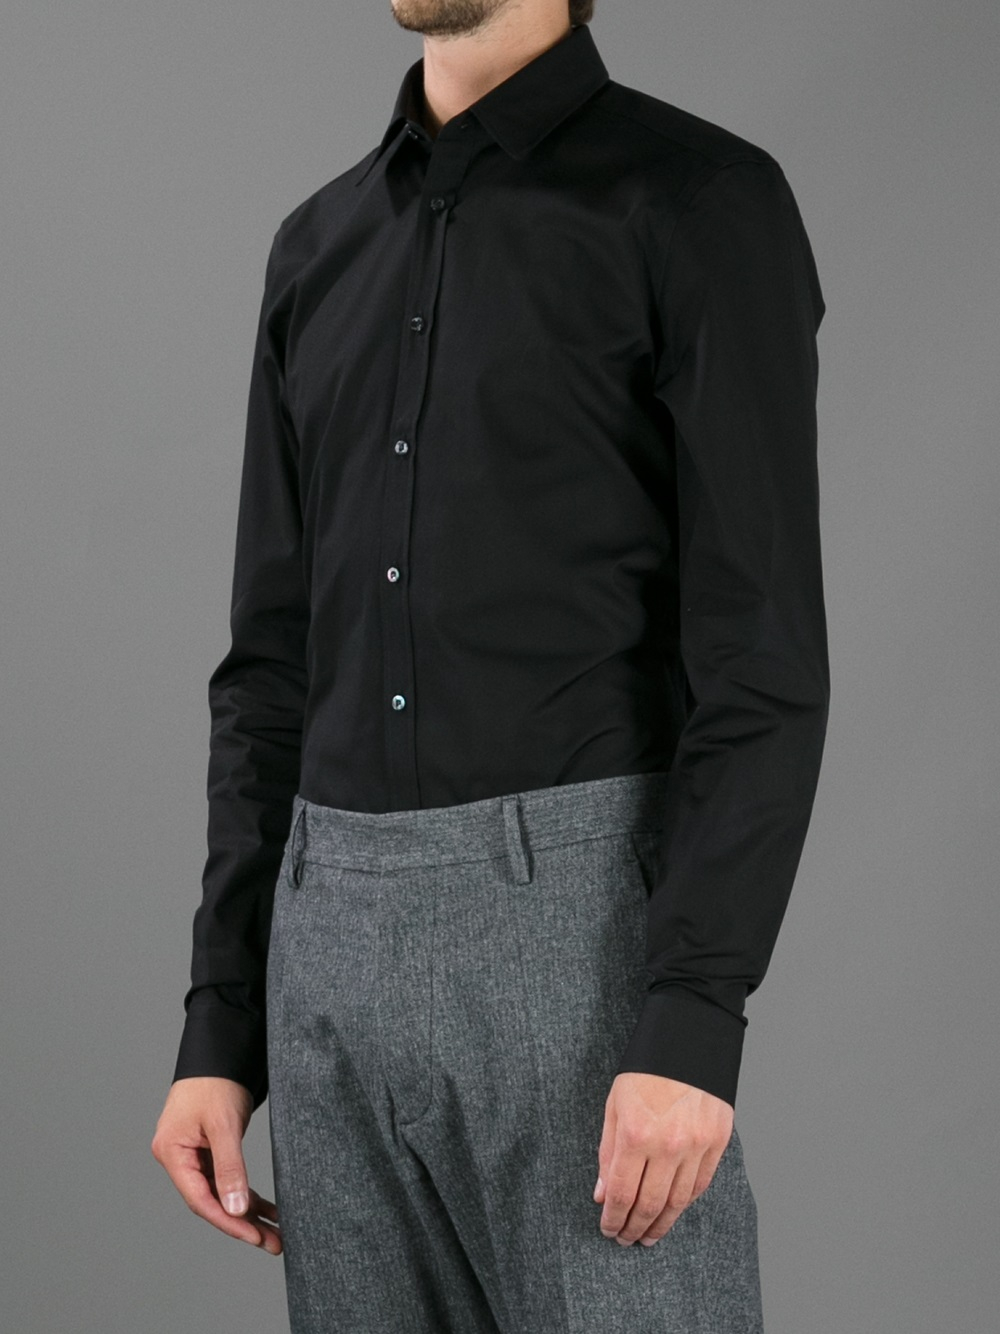 black gucci button up shirt,Save up to 18%,www.ilcascinone.com